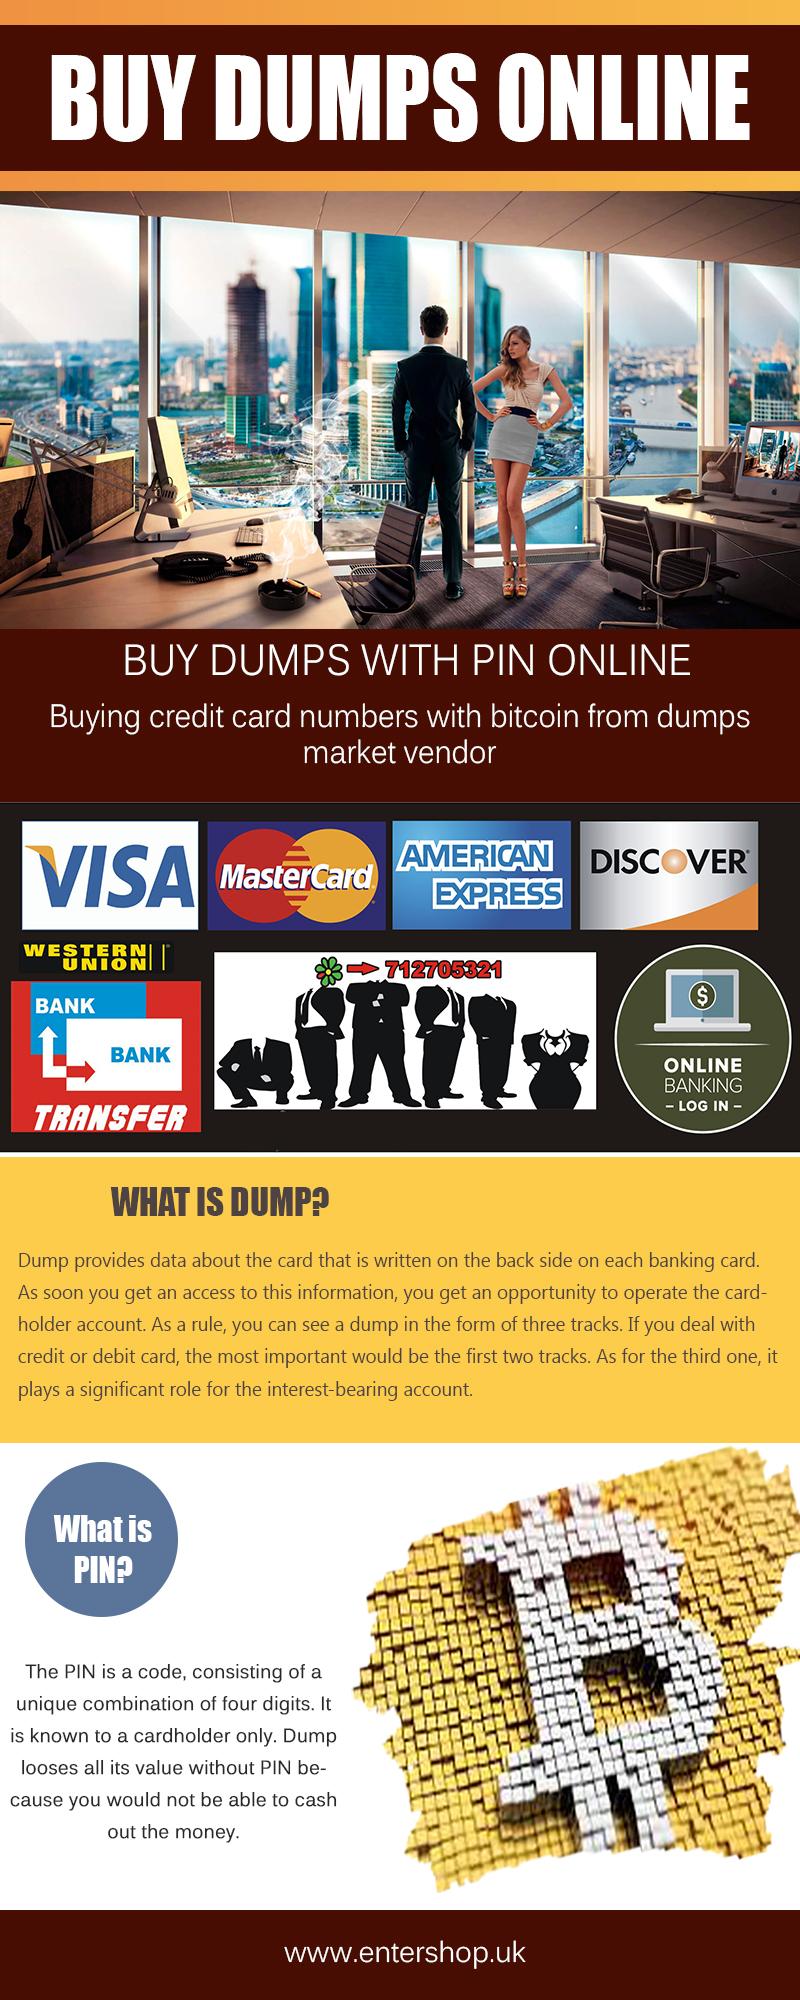 buy dumps with pin online shop